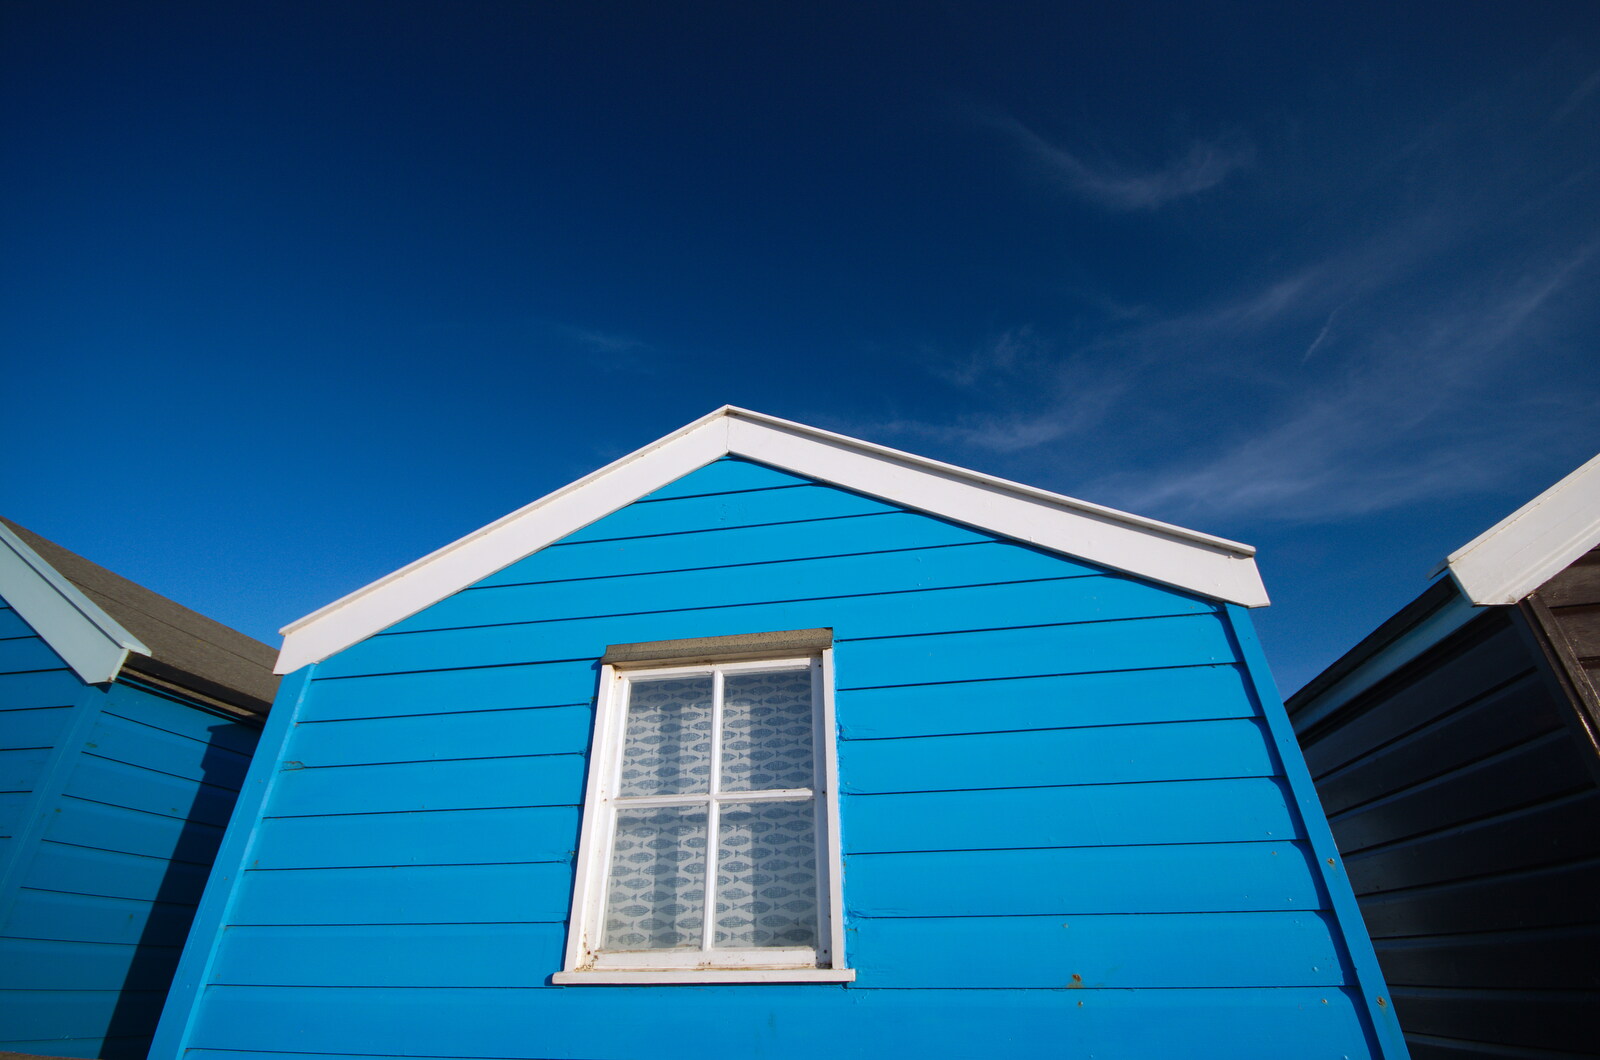 Beach huts: a study in blue from A Trip up a Lighthouse, Southwold, Suffolk - 27th October 2019